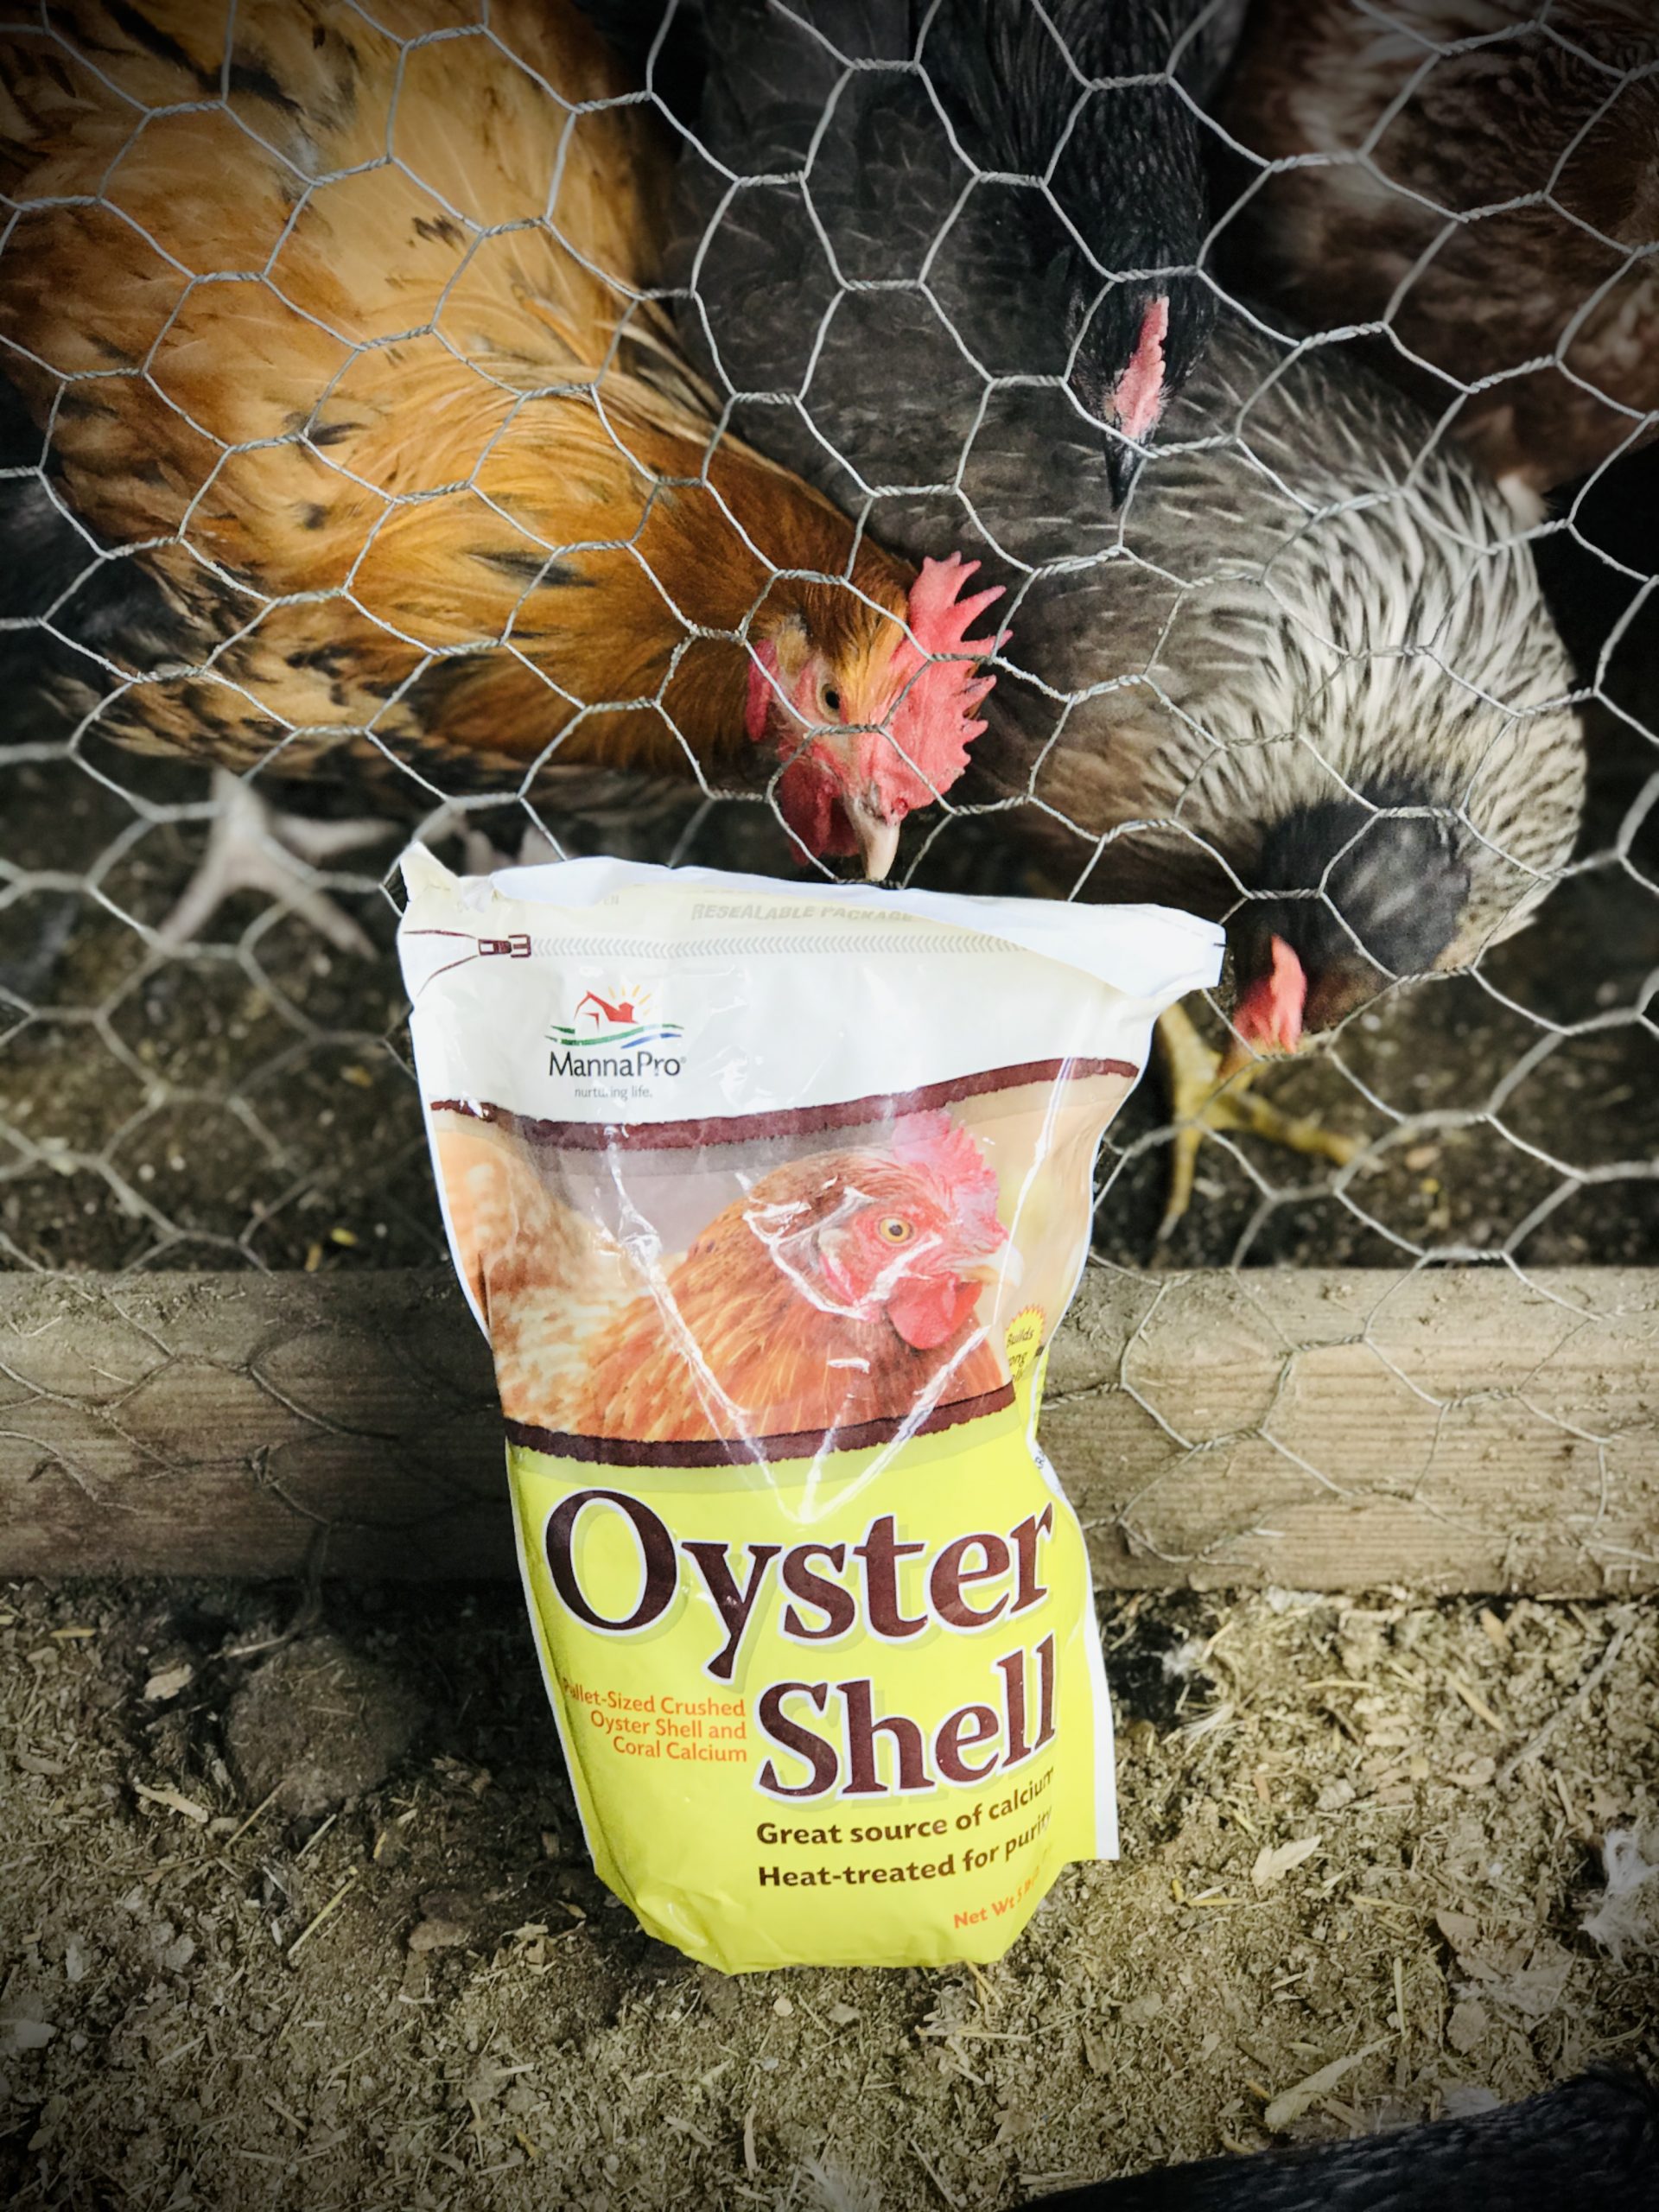 Increased Egg Production Chickens-with-Oyster-Shell-Bag